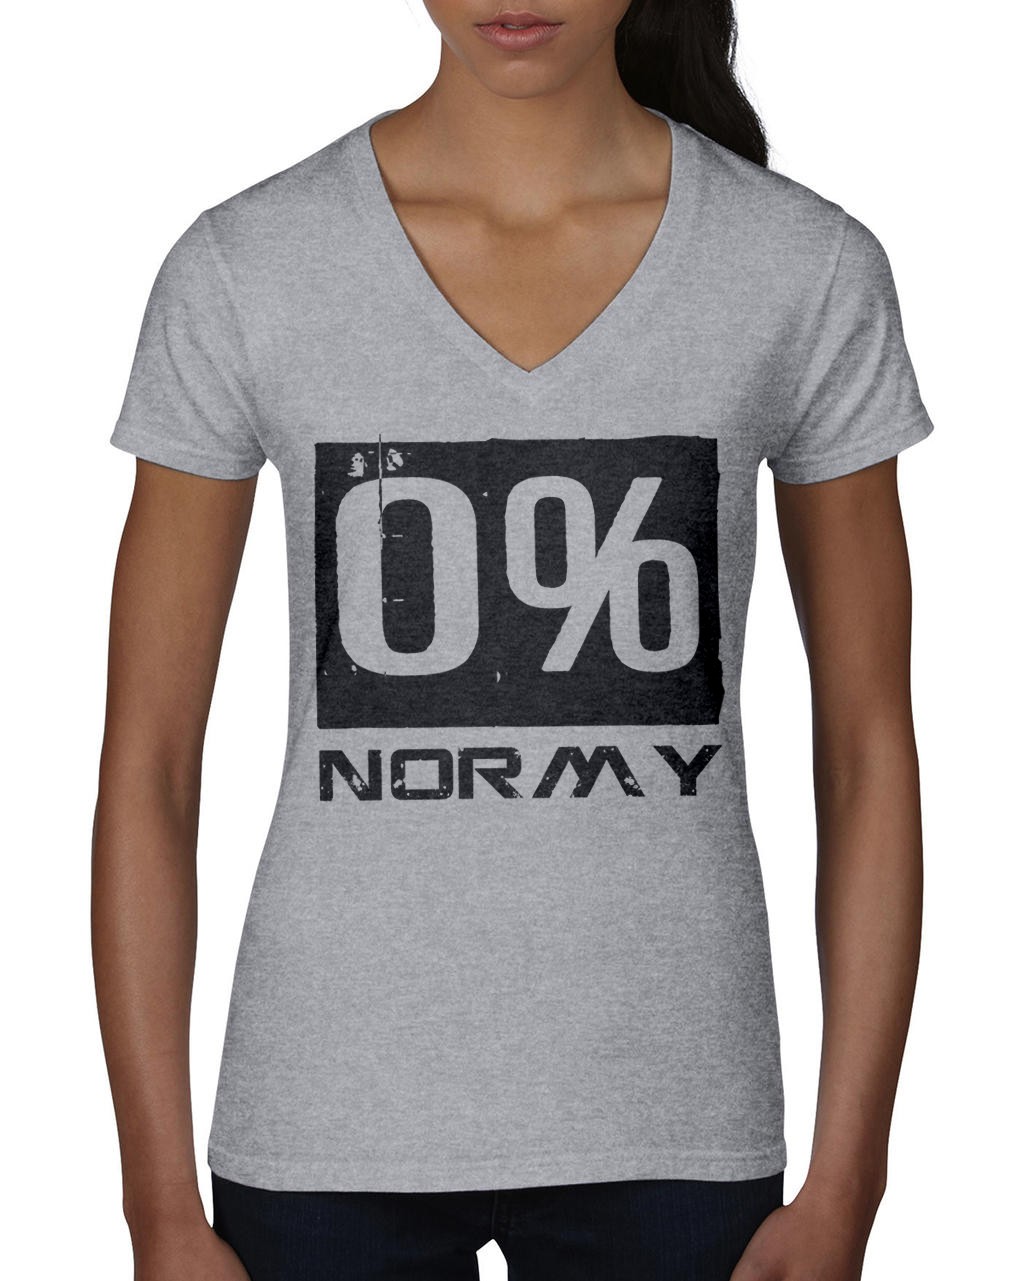 T-Shirt 0% Normy V-Neck Woman